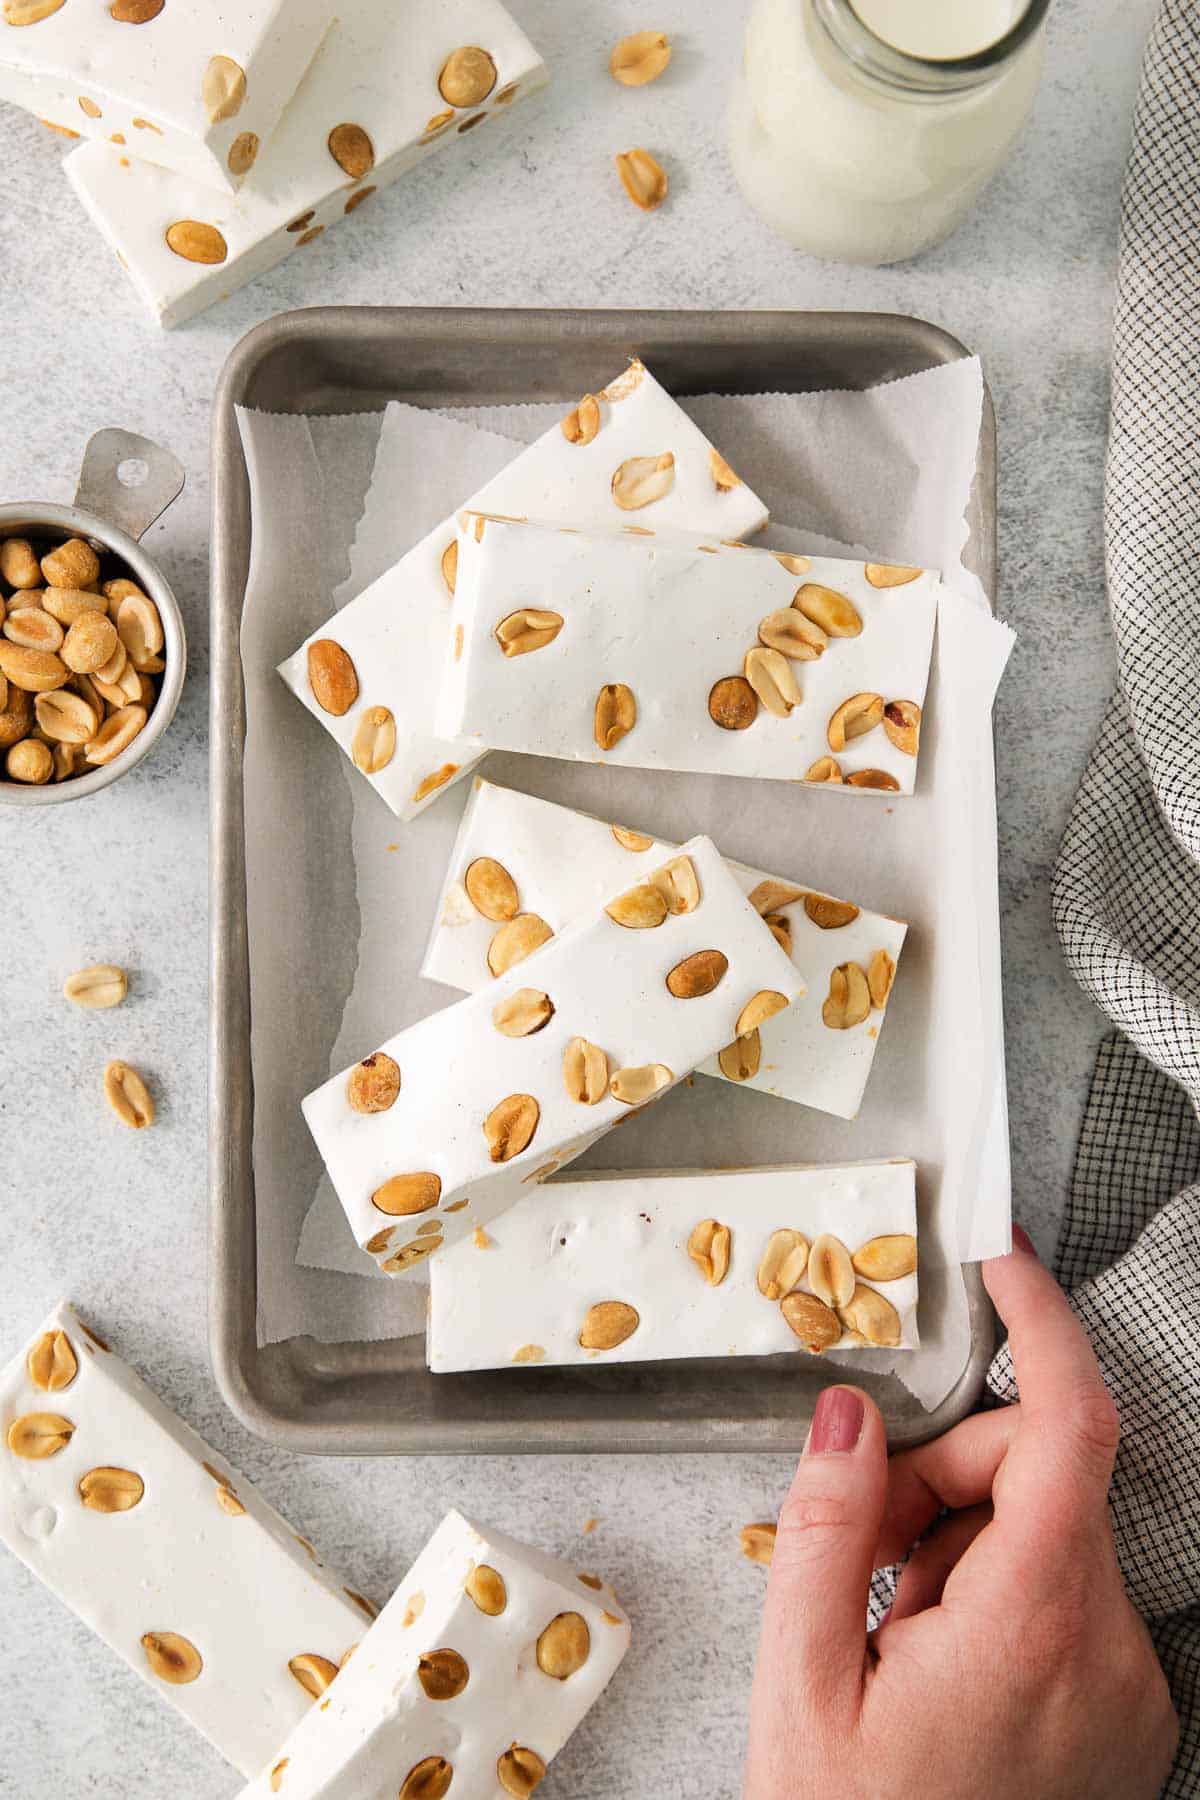 Nougat recipe on a baking sheet with parchment paper and a hand touching the baking sheet